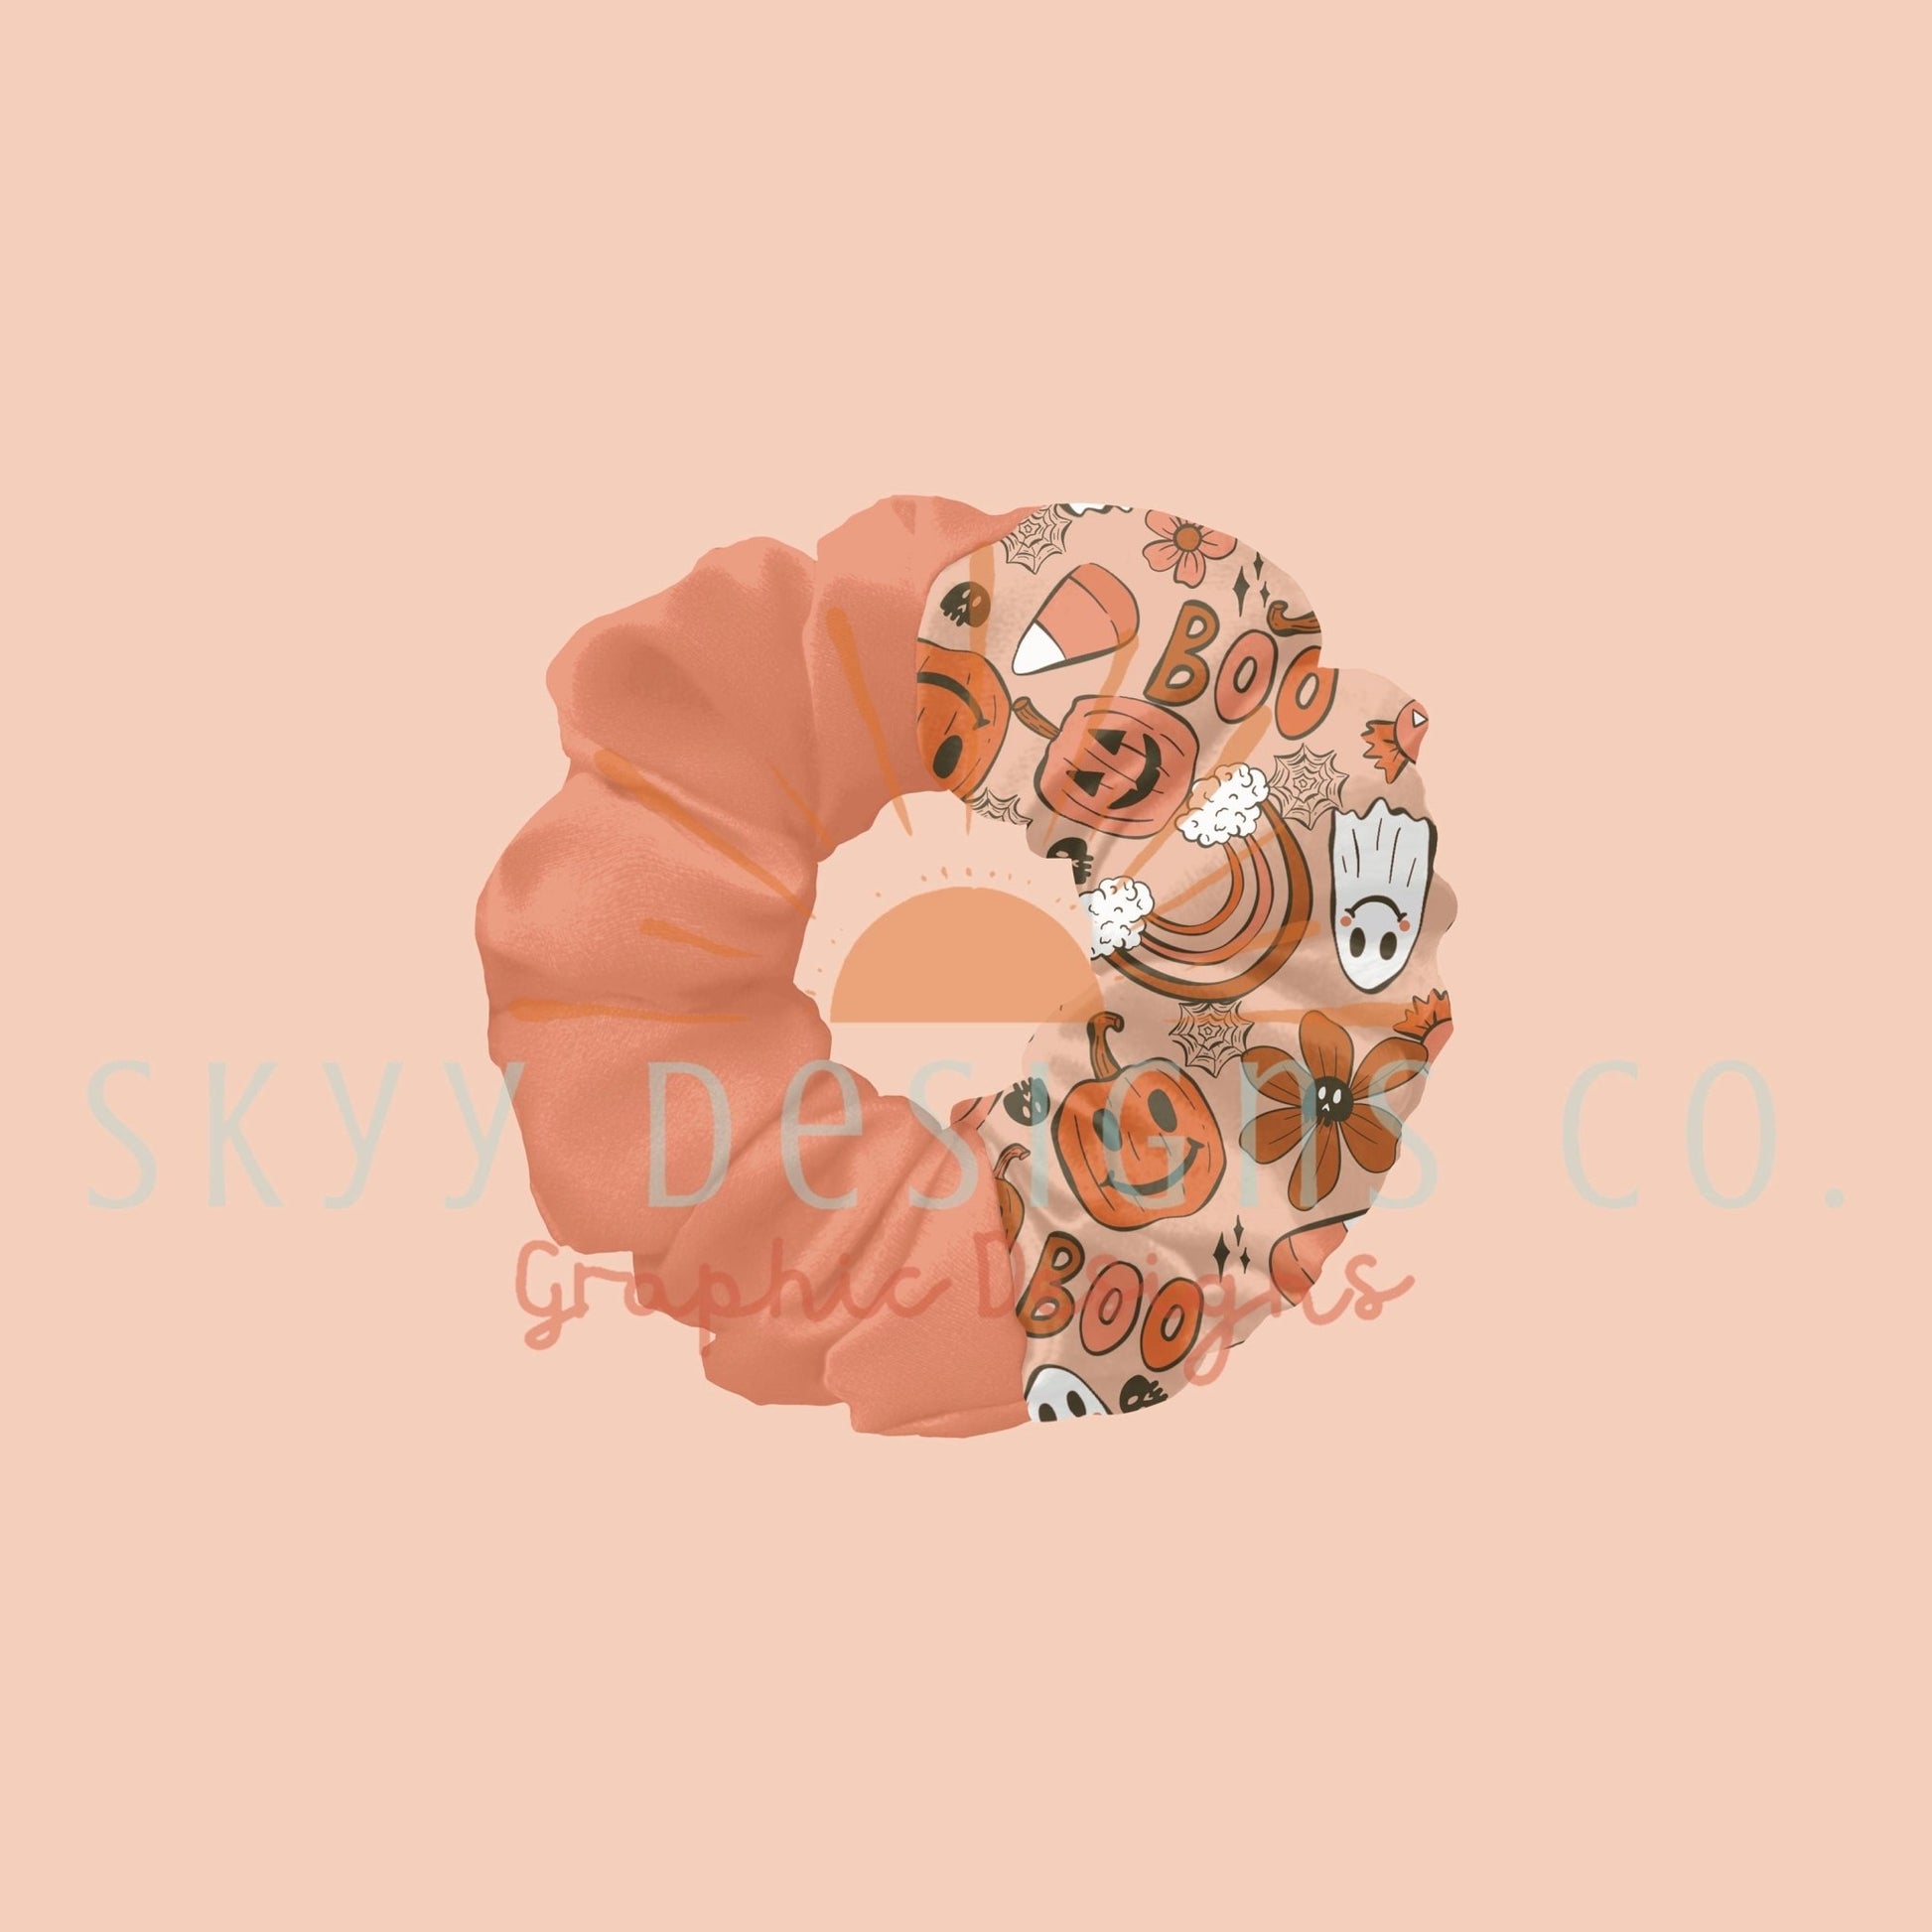 two toned scrunchie mock-up template - SkyyDesignsCo